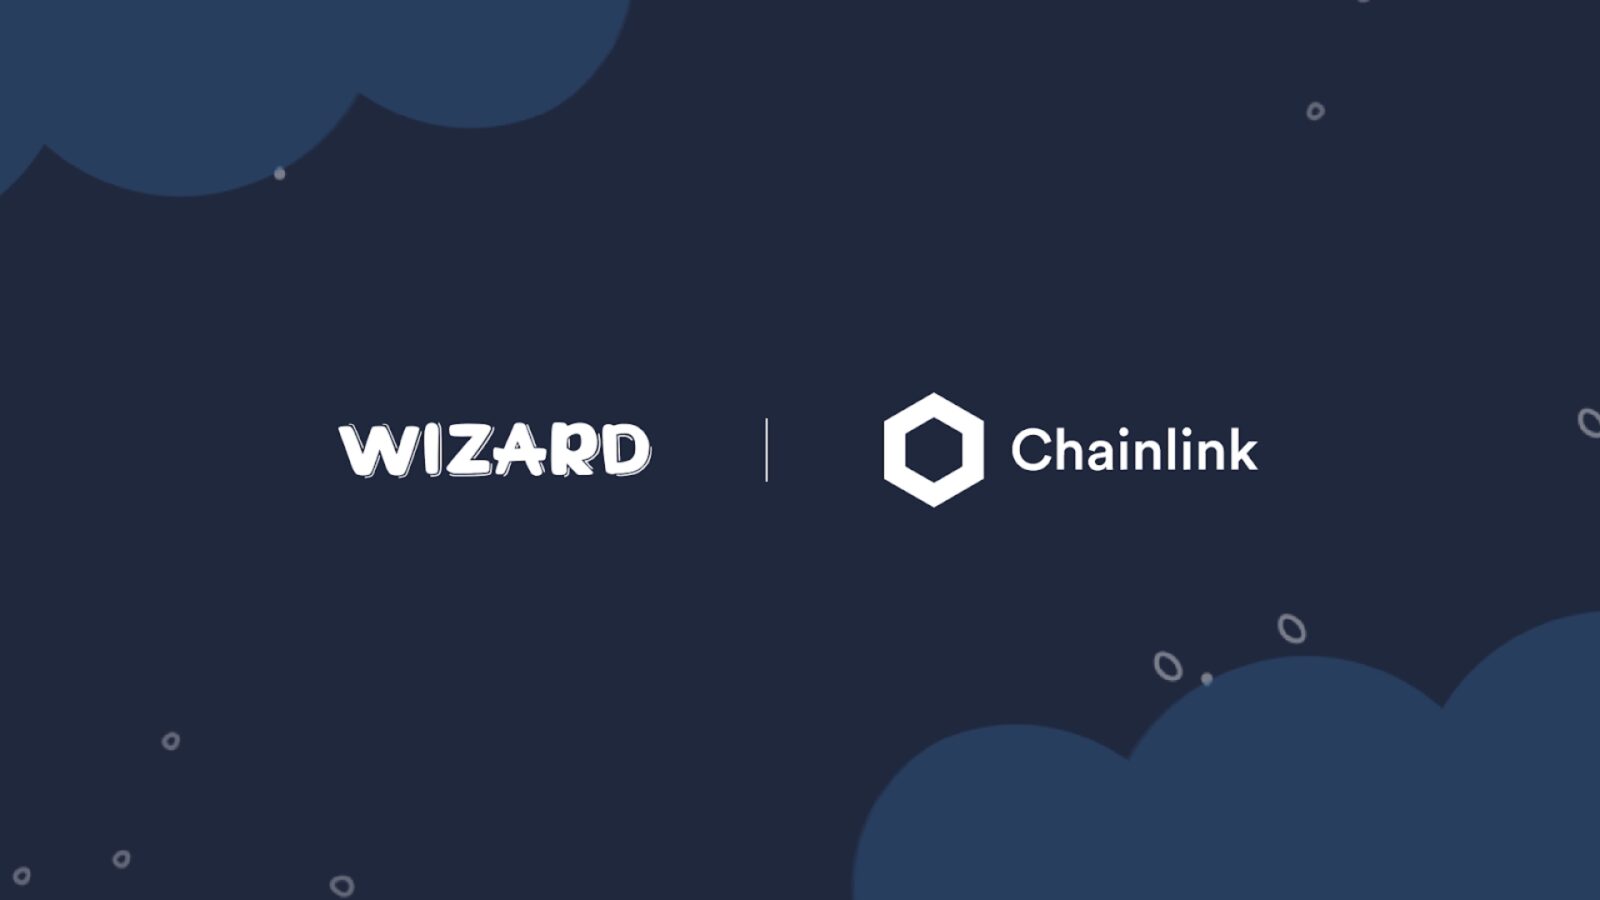 Wizard Financial, a GameFi project with multiple P2E games, has integrated Chainlink Verifiable Random Function (VRF) on the BNB Chain in order to access a tamper-proof and auditable source of randomness.